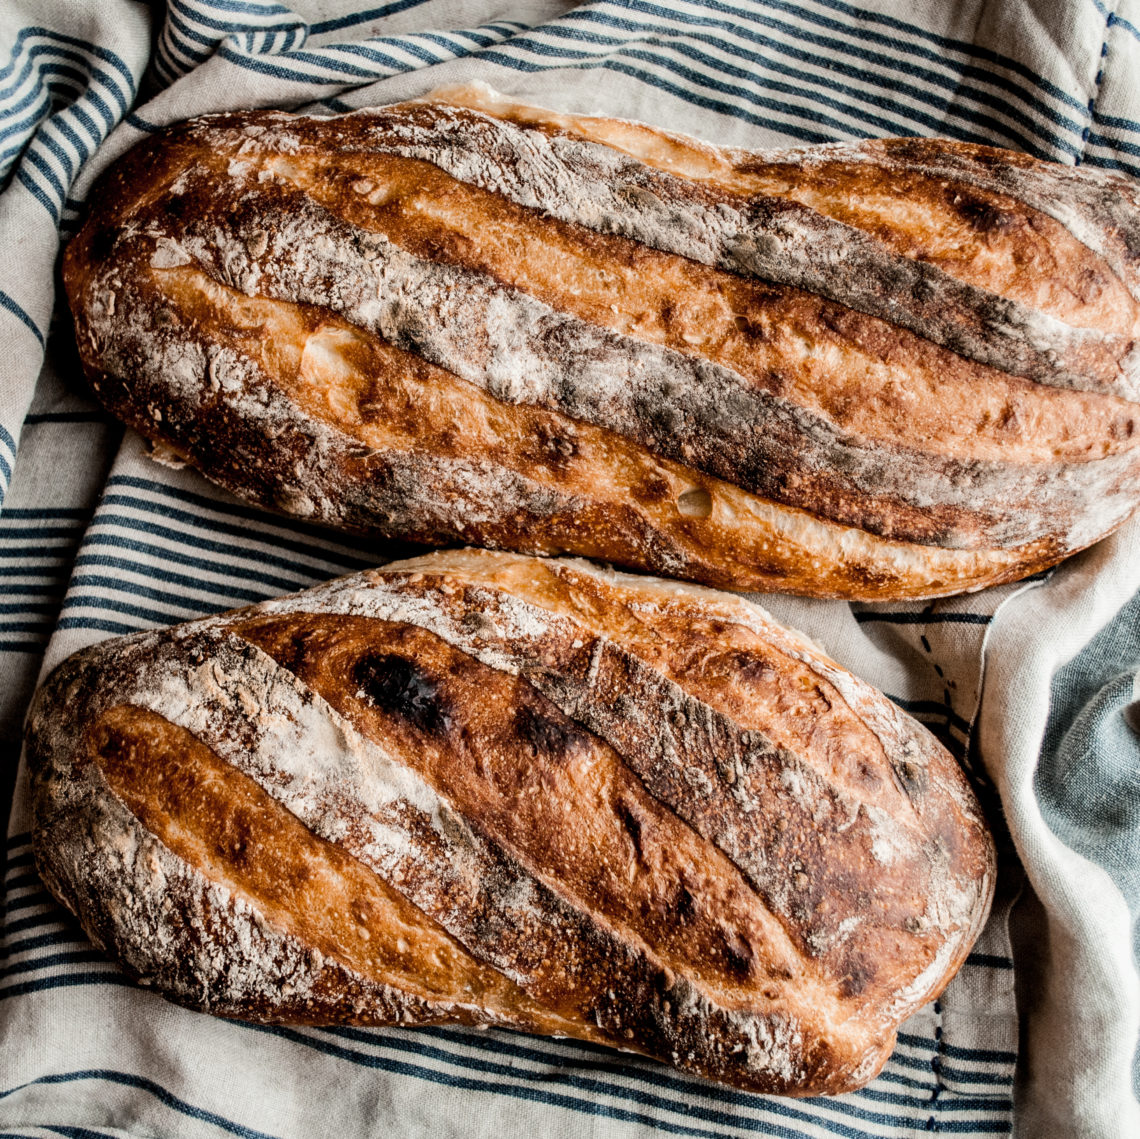 Four ingredients, no experience required for most amazing and beautiful bread you've ever made. You will be delighted by how truly easy it is to make this heavenly chewy, crispy crust, no-knead french bread.